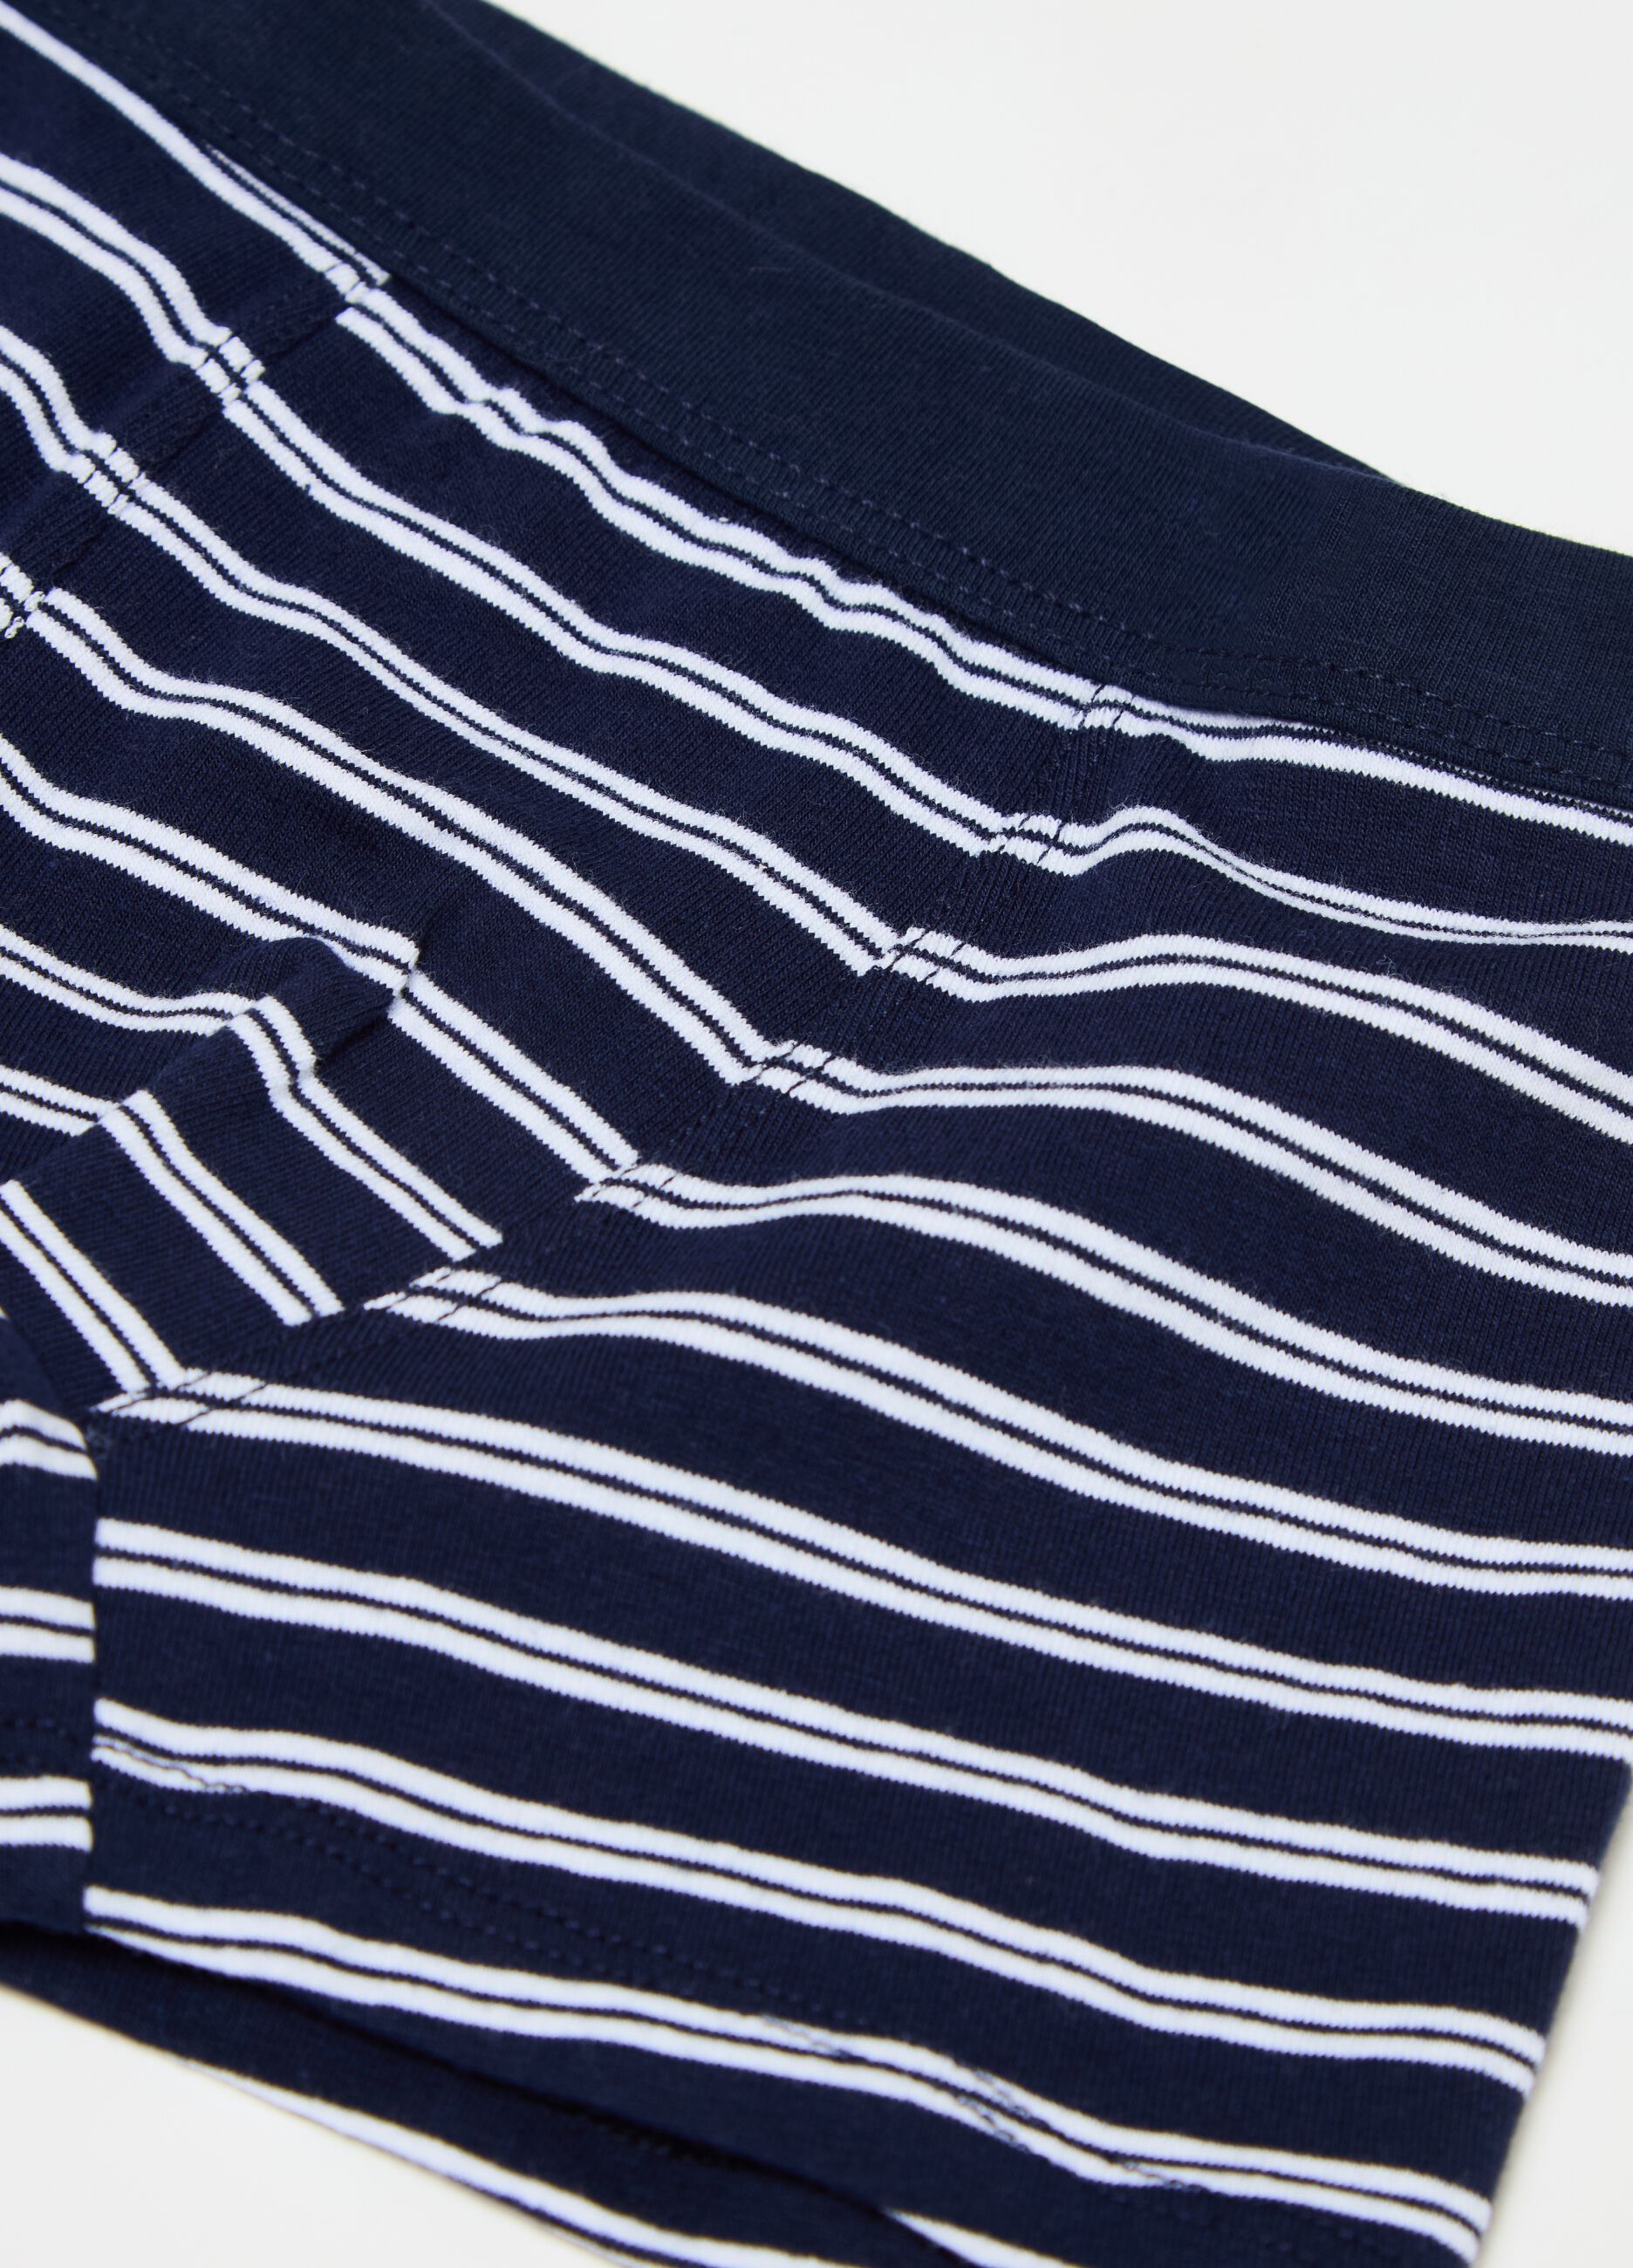 Organic cotton boxer shorts with striped pattern